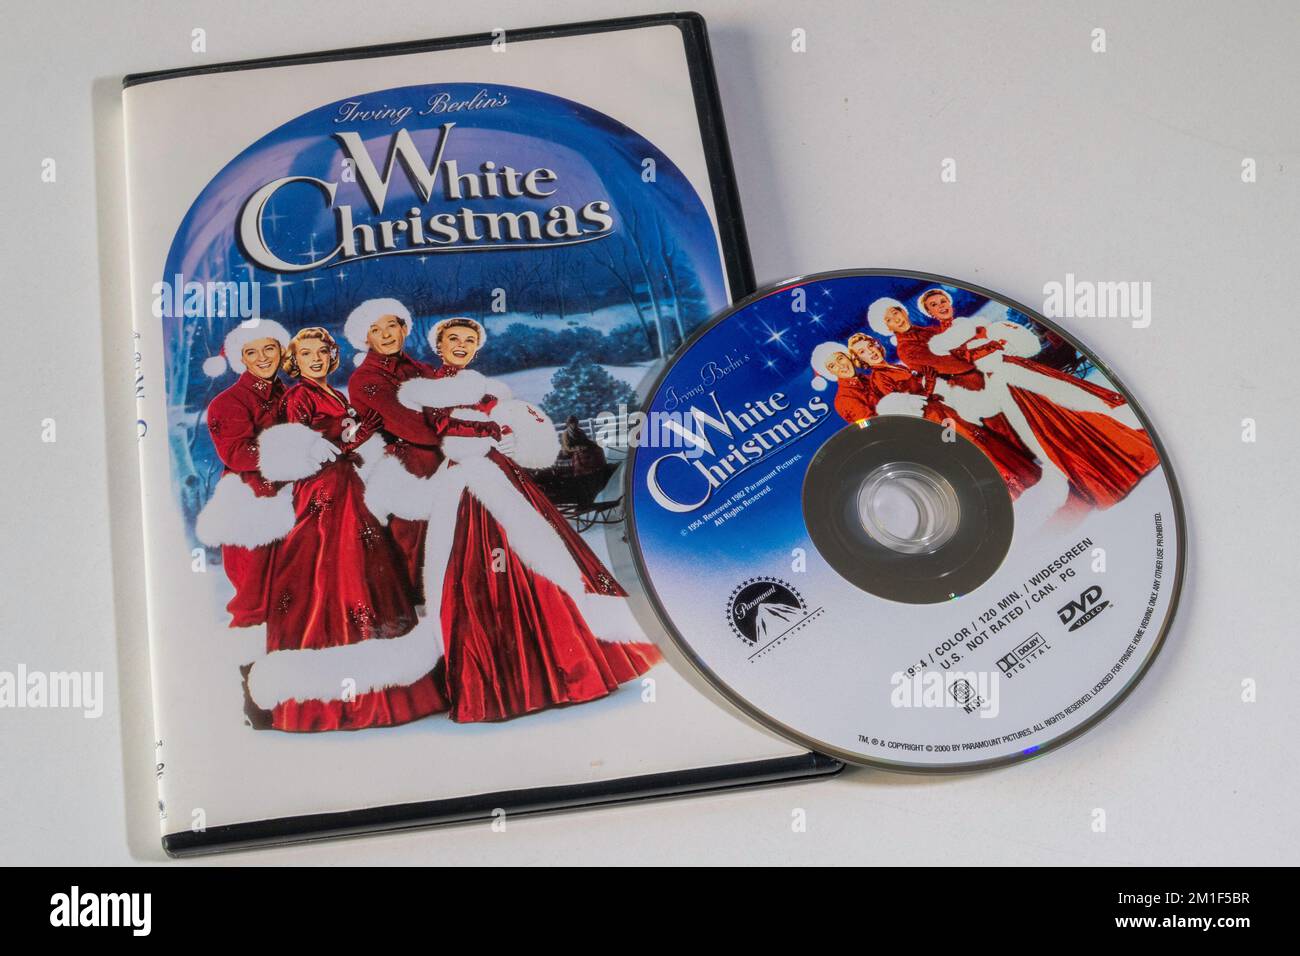 'White Christmas' is a classic 1954 traditional musical motion picture that was renewed on DVD in 1982 by Paramount Pictures, USA Stock Photo